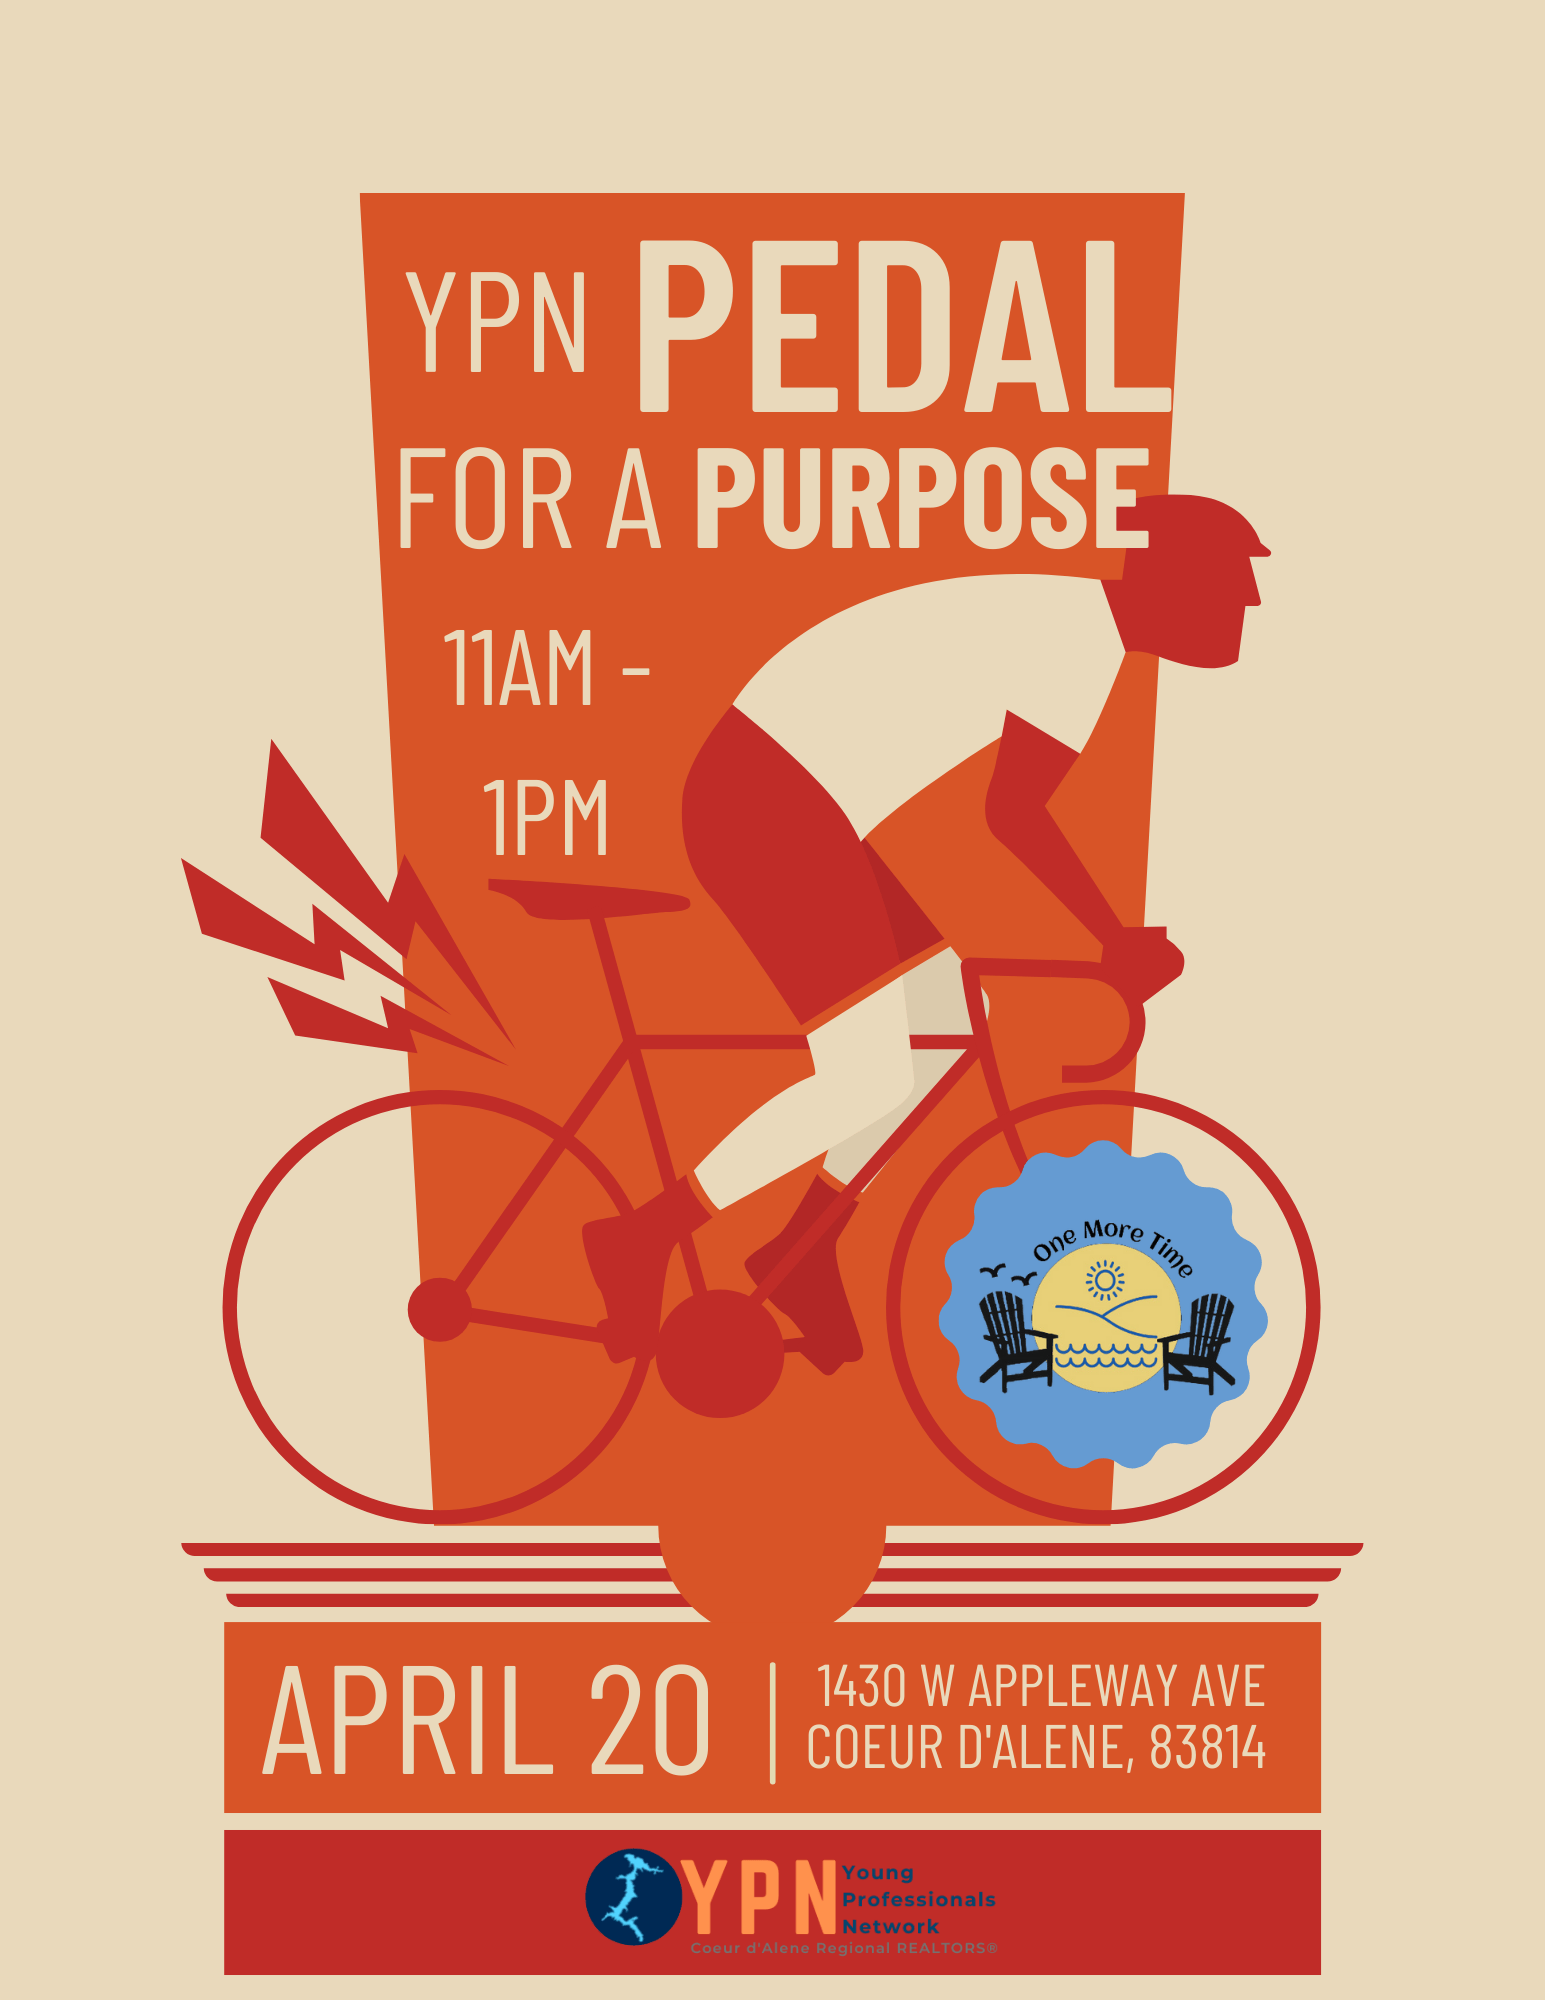 YPN Pedal for a Purpose